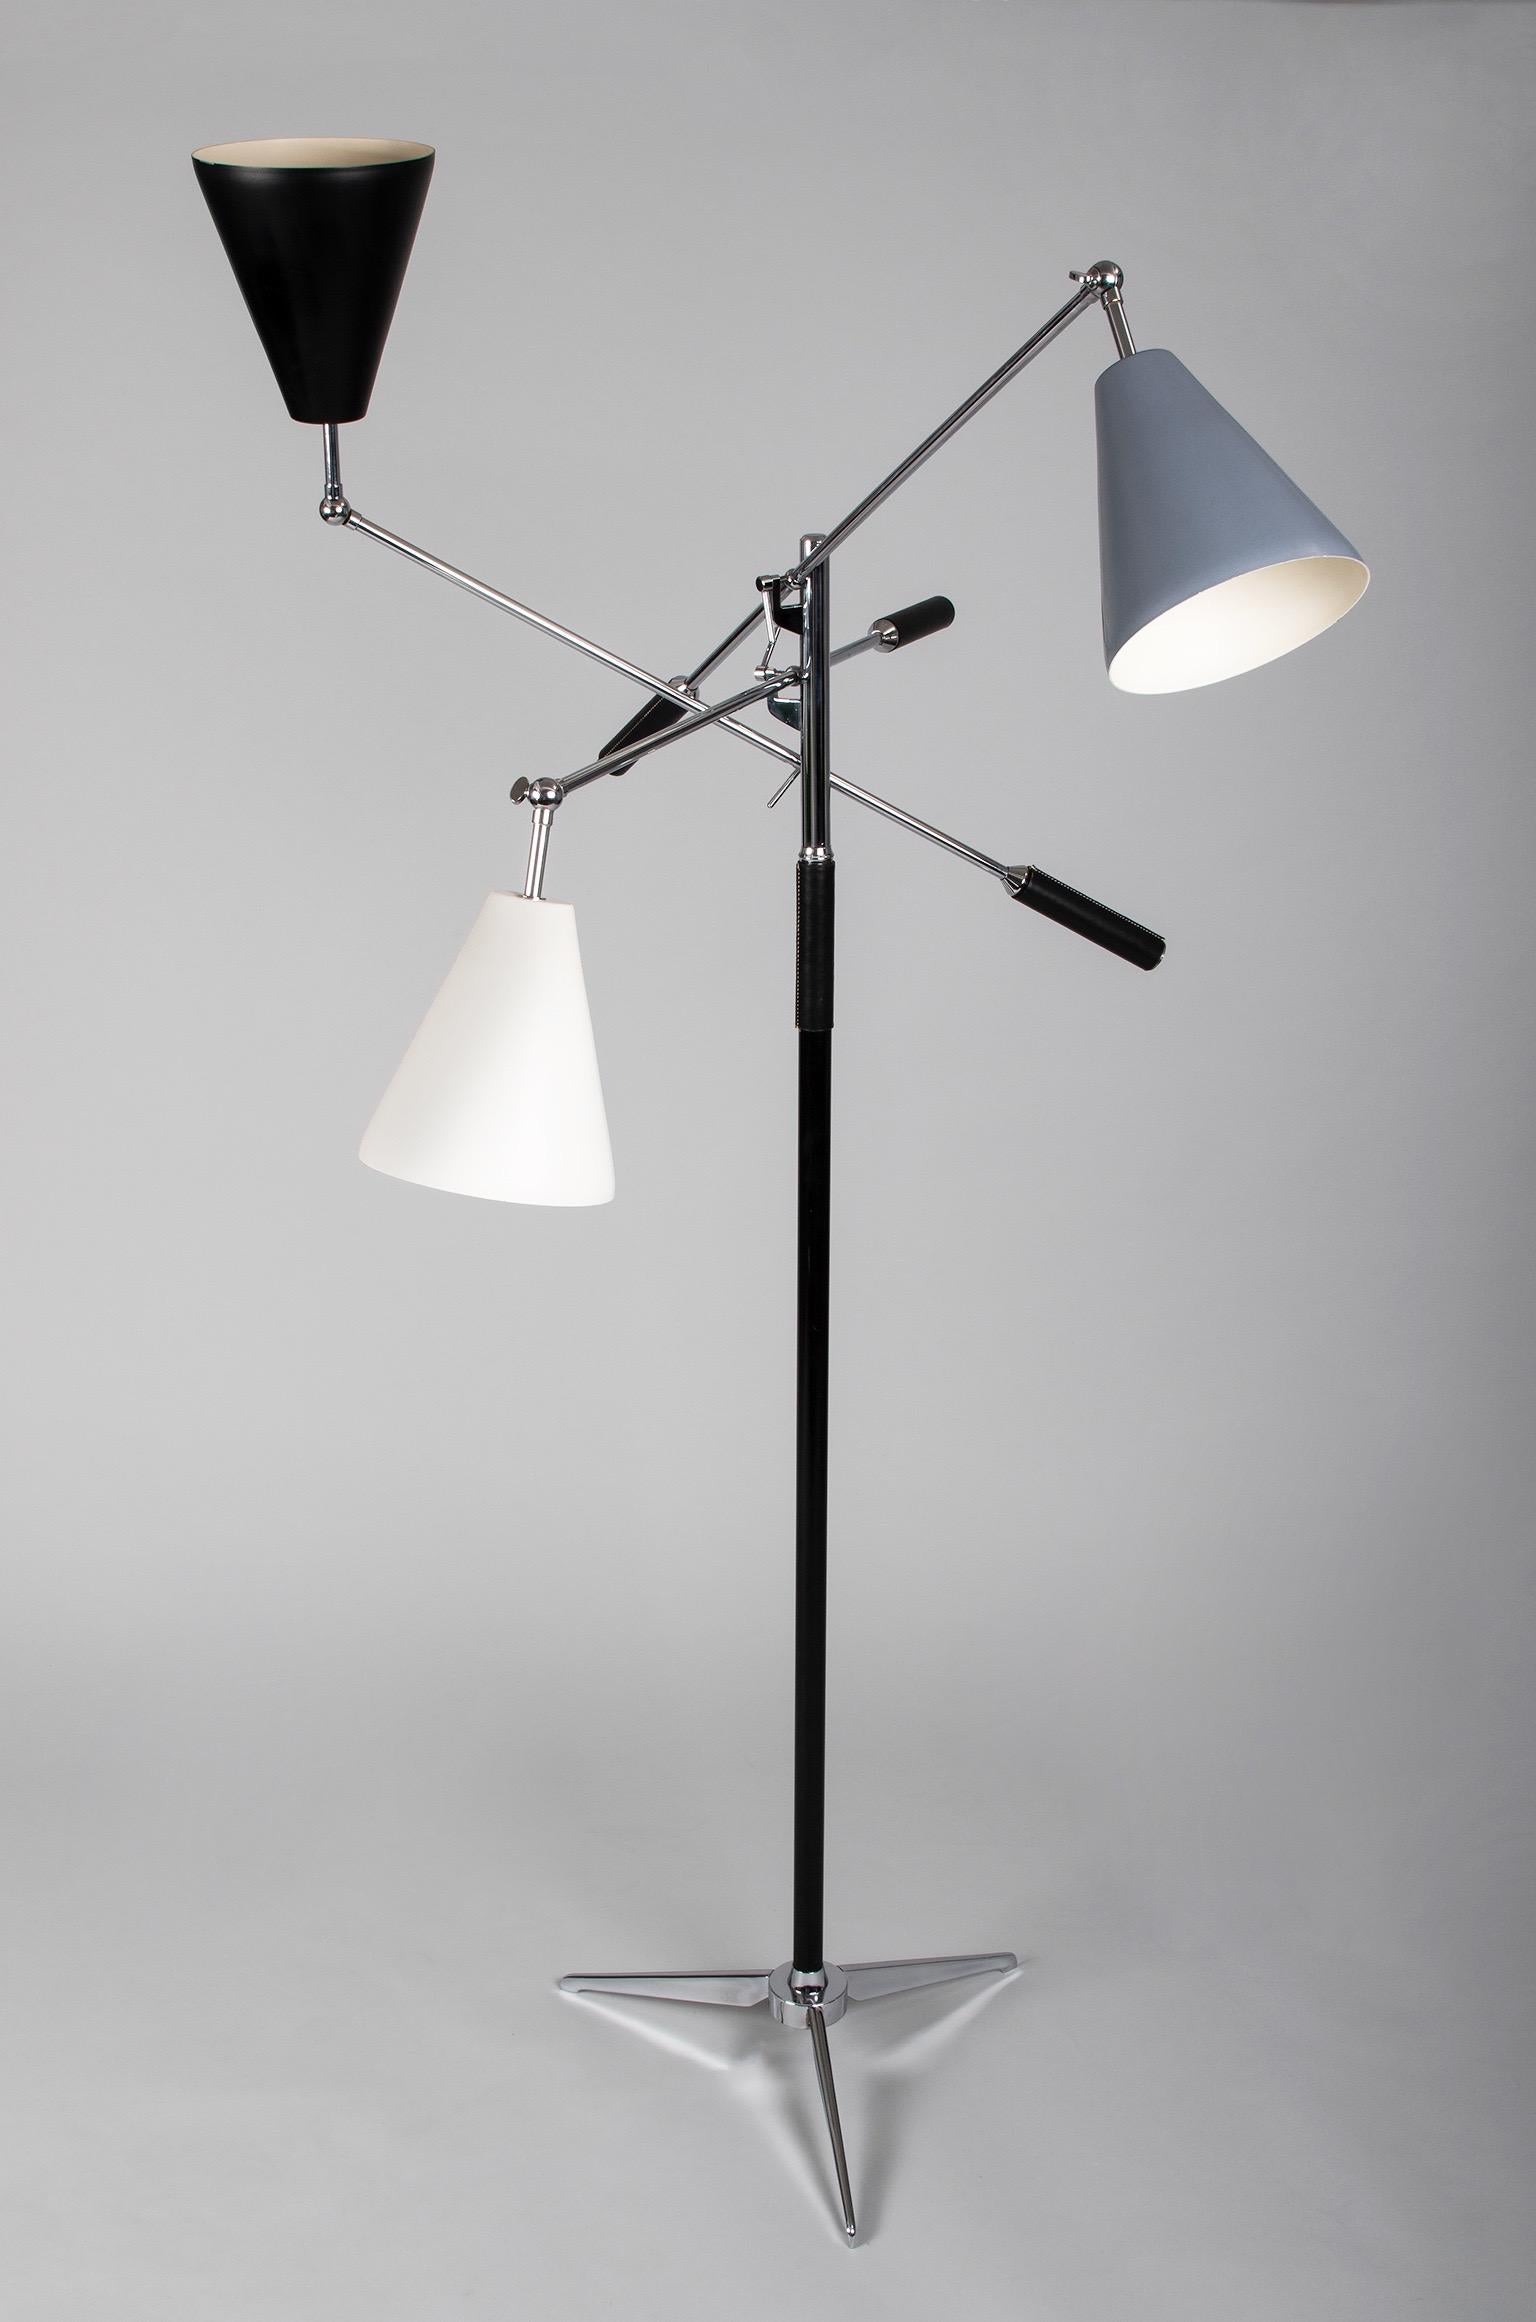 Italy, 1950s 

An architectural triennale floor lamp in the style of Angelo Lelii (sometimes spelled Angelo Lelli) for Arredoluce, with three moveable cone-shaped shades enameled in white, grey, and black. Supported by a partially leather-clad shaft